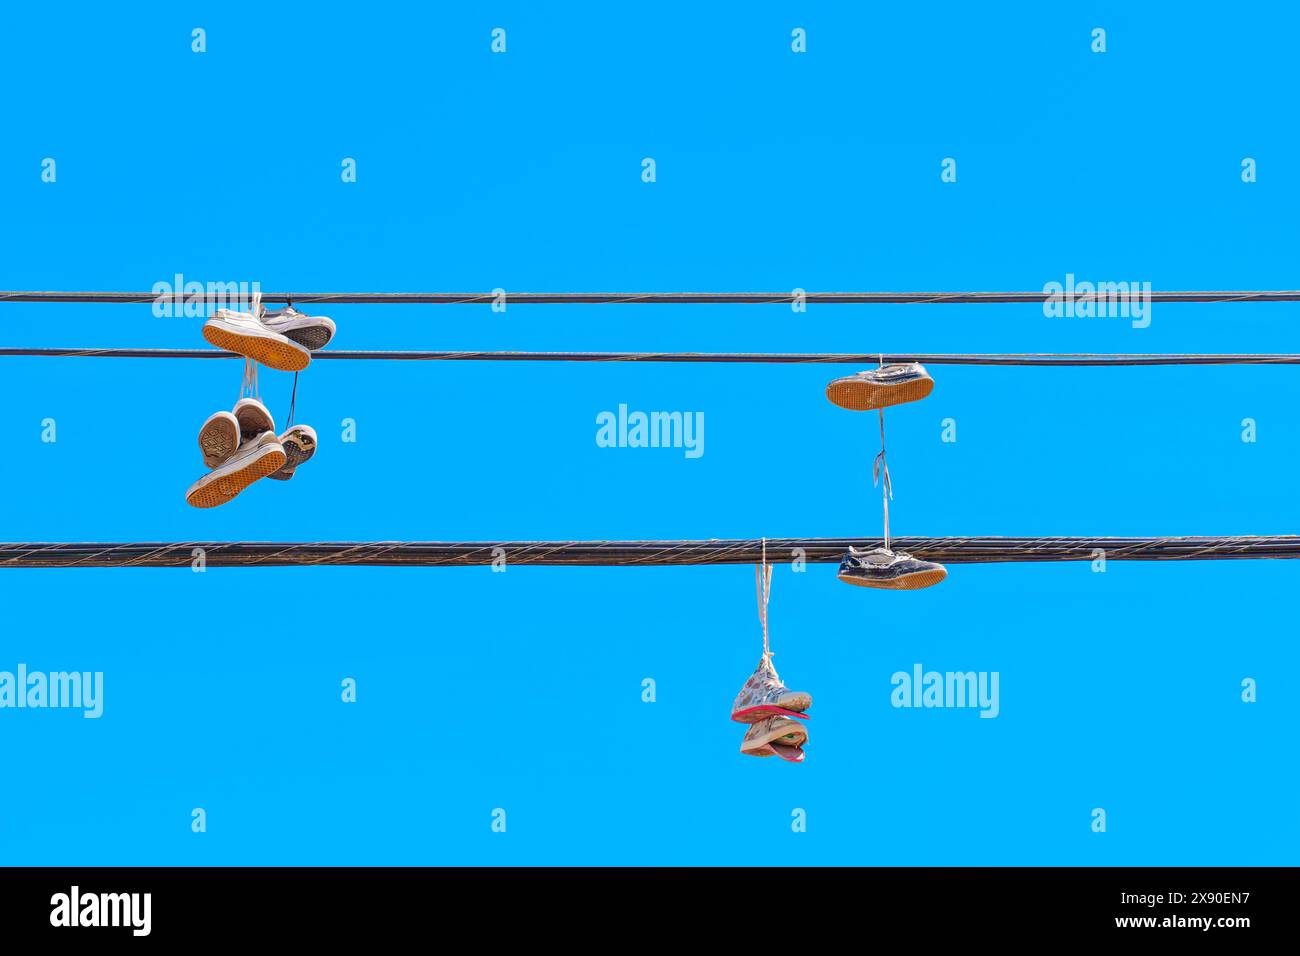 Several pairs of well-worn shoes are seen dangling from power lines, framed by a bright blue sky. Mysterious practice of shoe tossing concept. Stock Photo